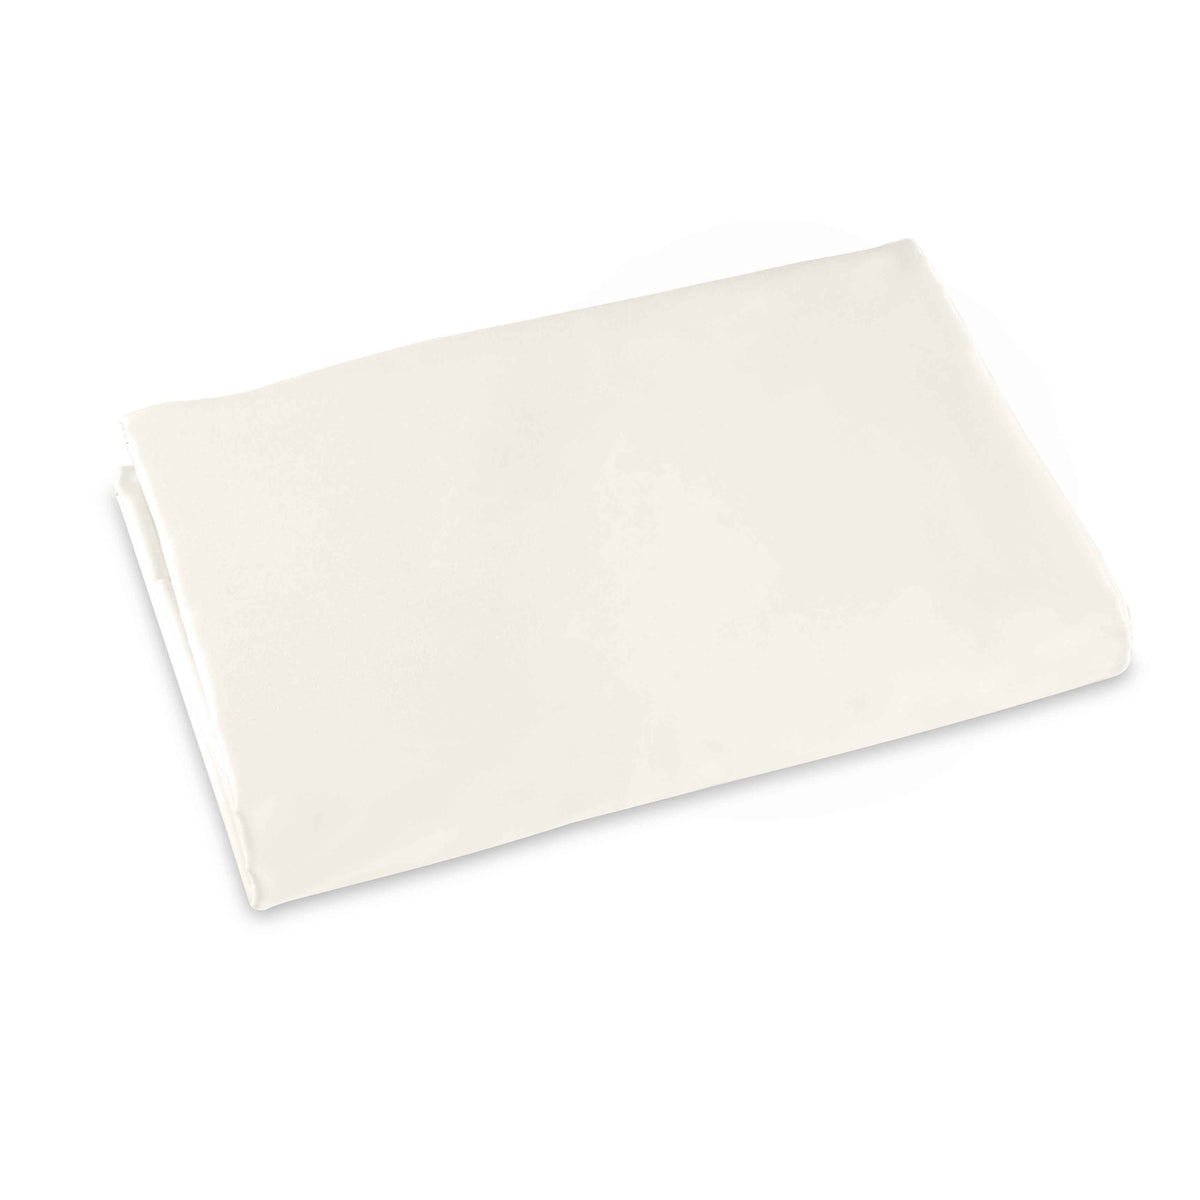 Clear Image of Signoria Tuscan Dreams Fitted Sheet in Ivory Color